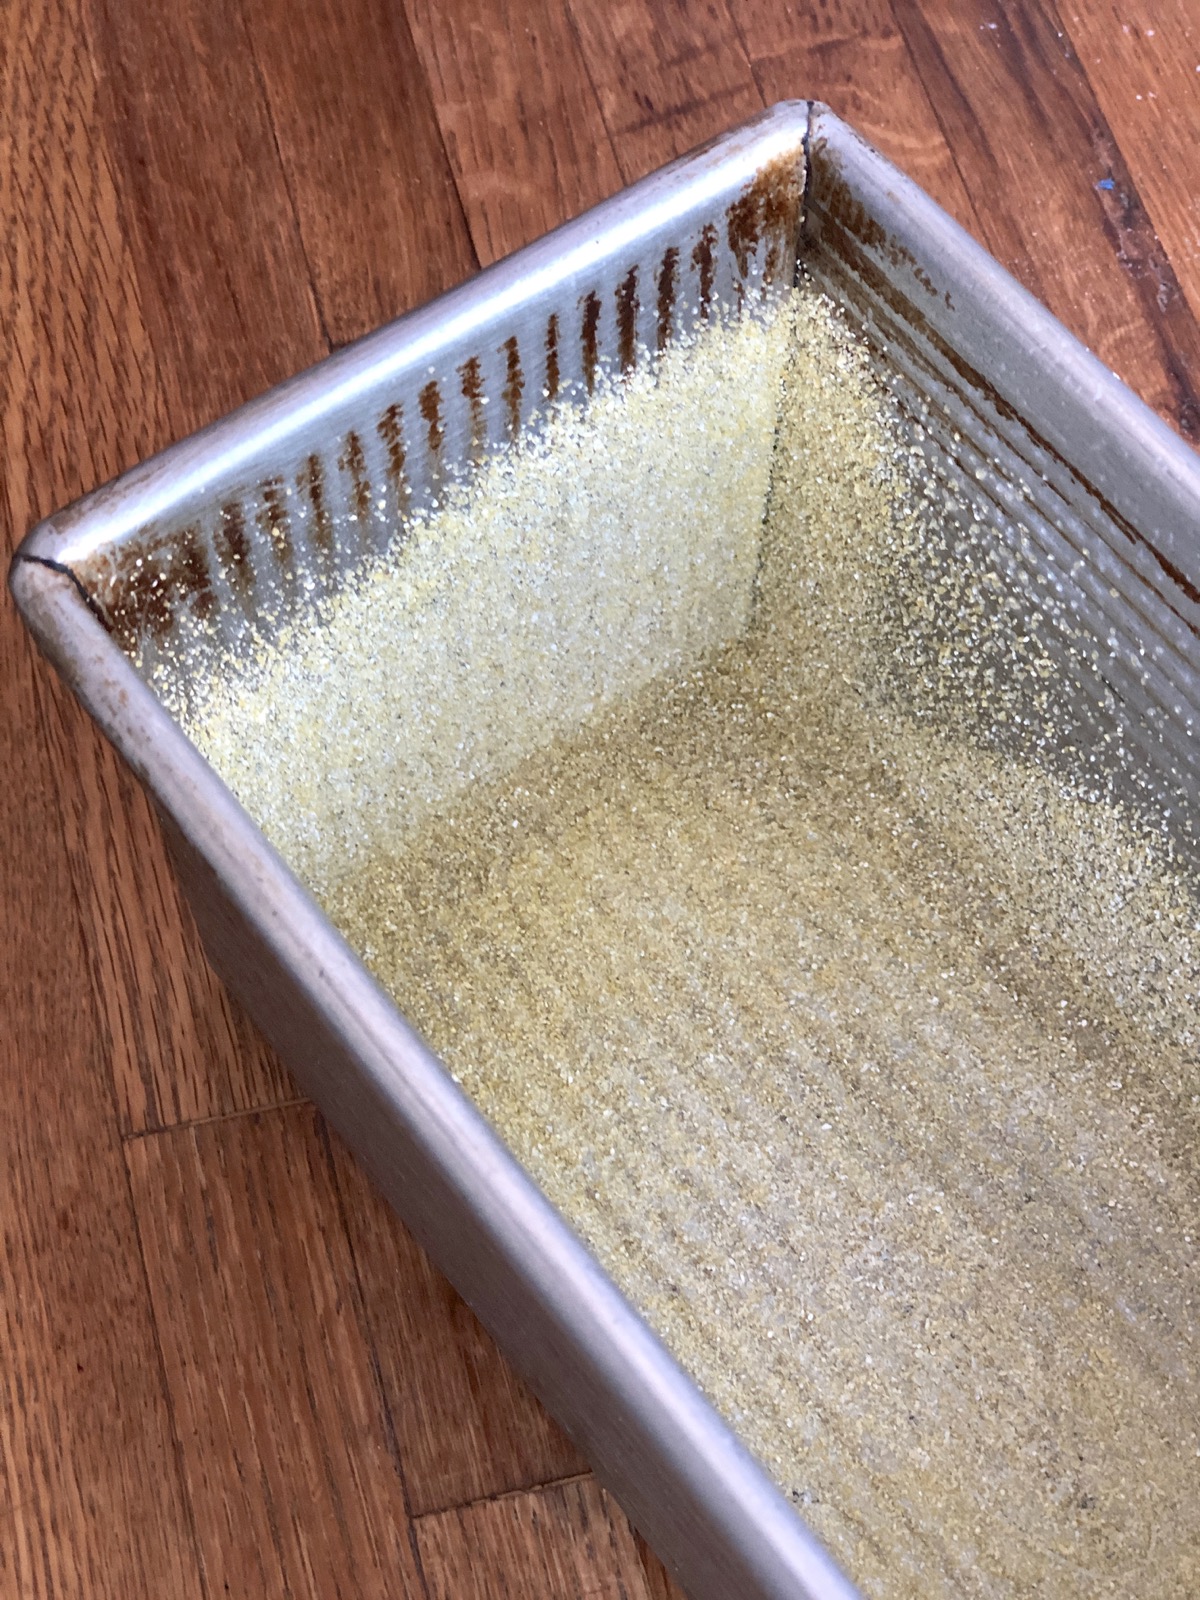 A 9" x 9" x 9" loaf pan, looking down from above to see its straight sides and a heavy dusting of cornmeal in its interior.